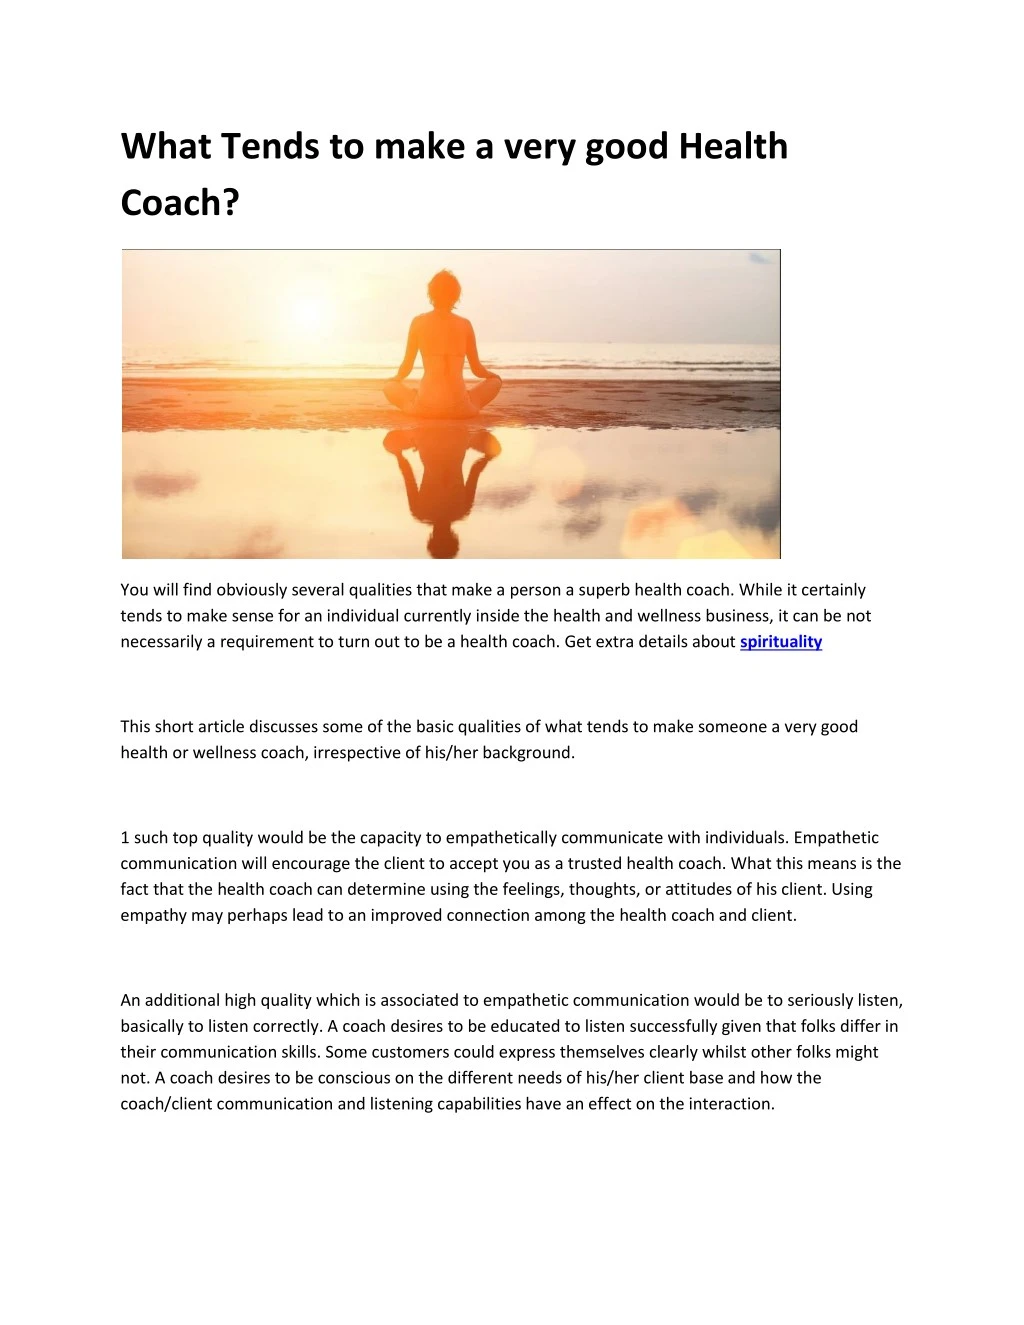 what tends to make a very good health coach